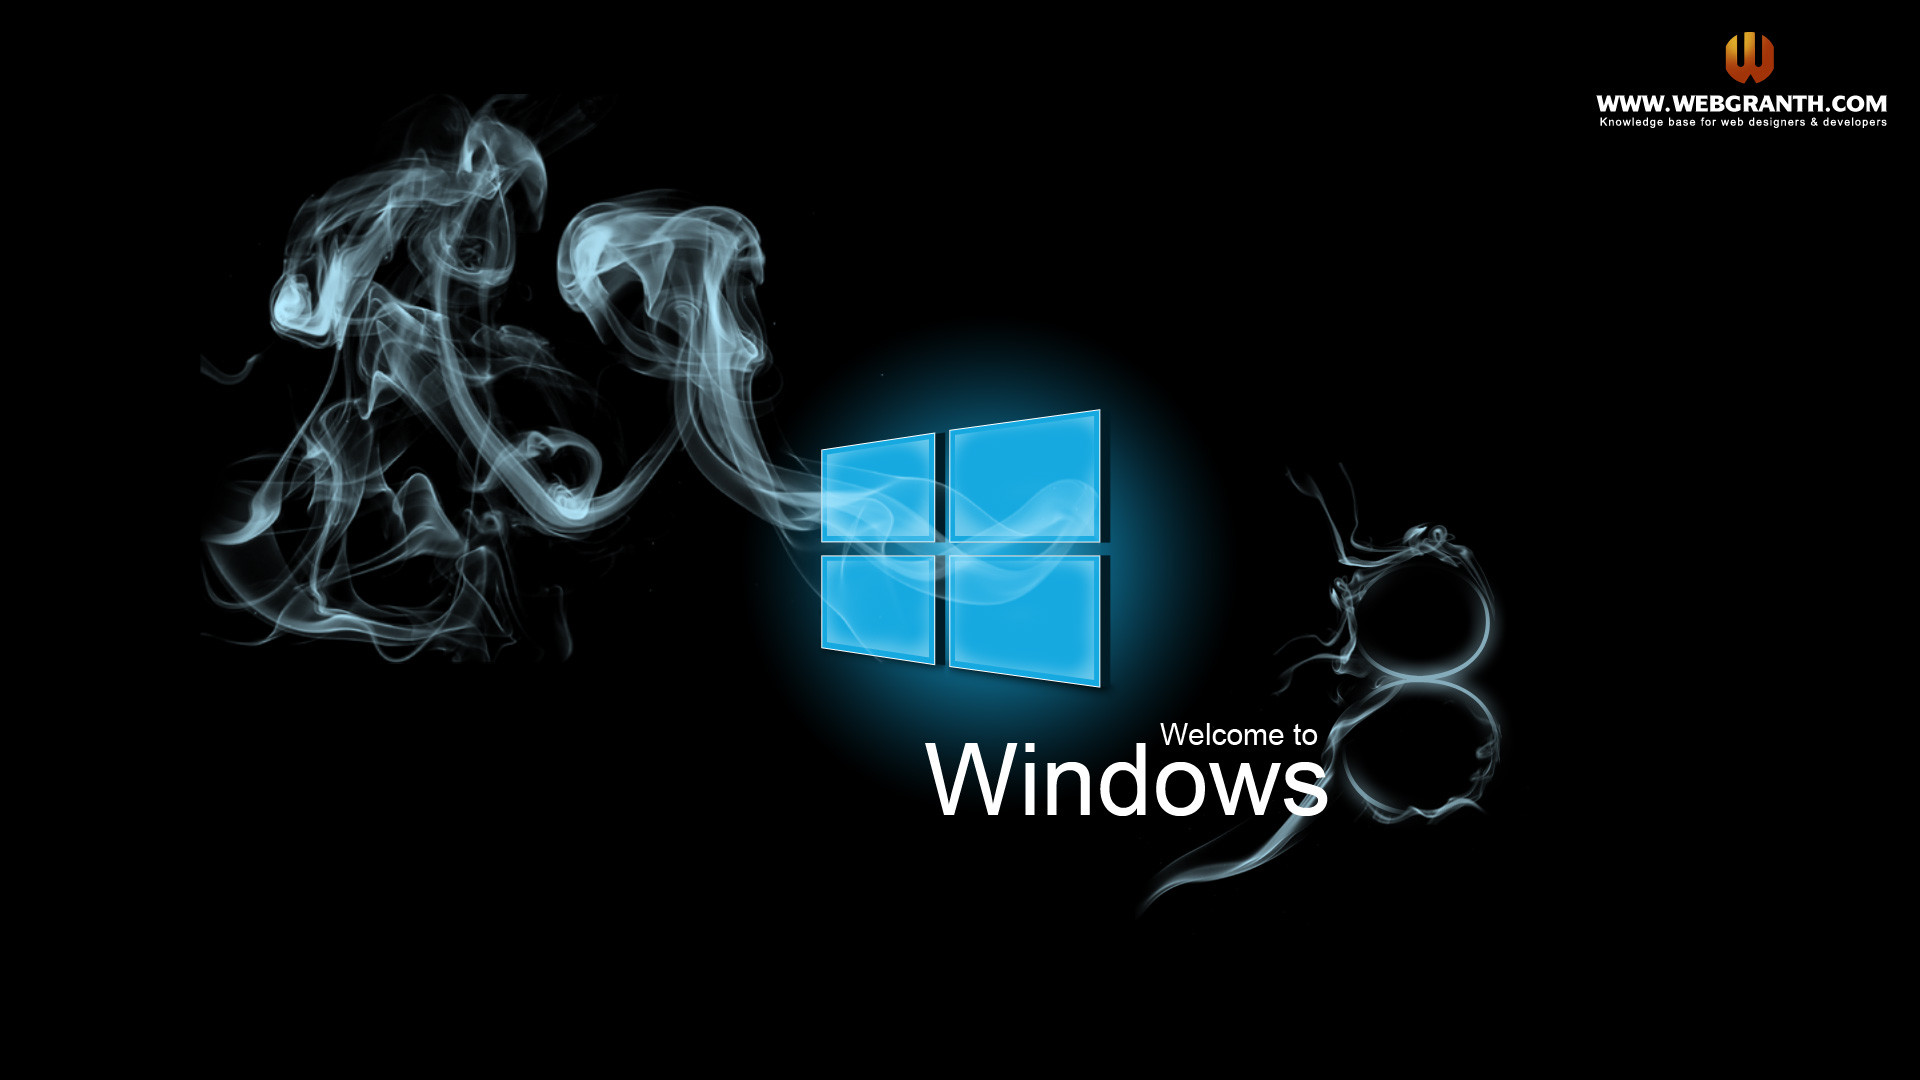 1920x1080 Free Windows 8 Wallpaper Backgrounds (2): View HD Image of Free .